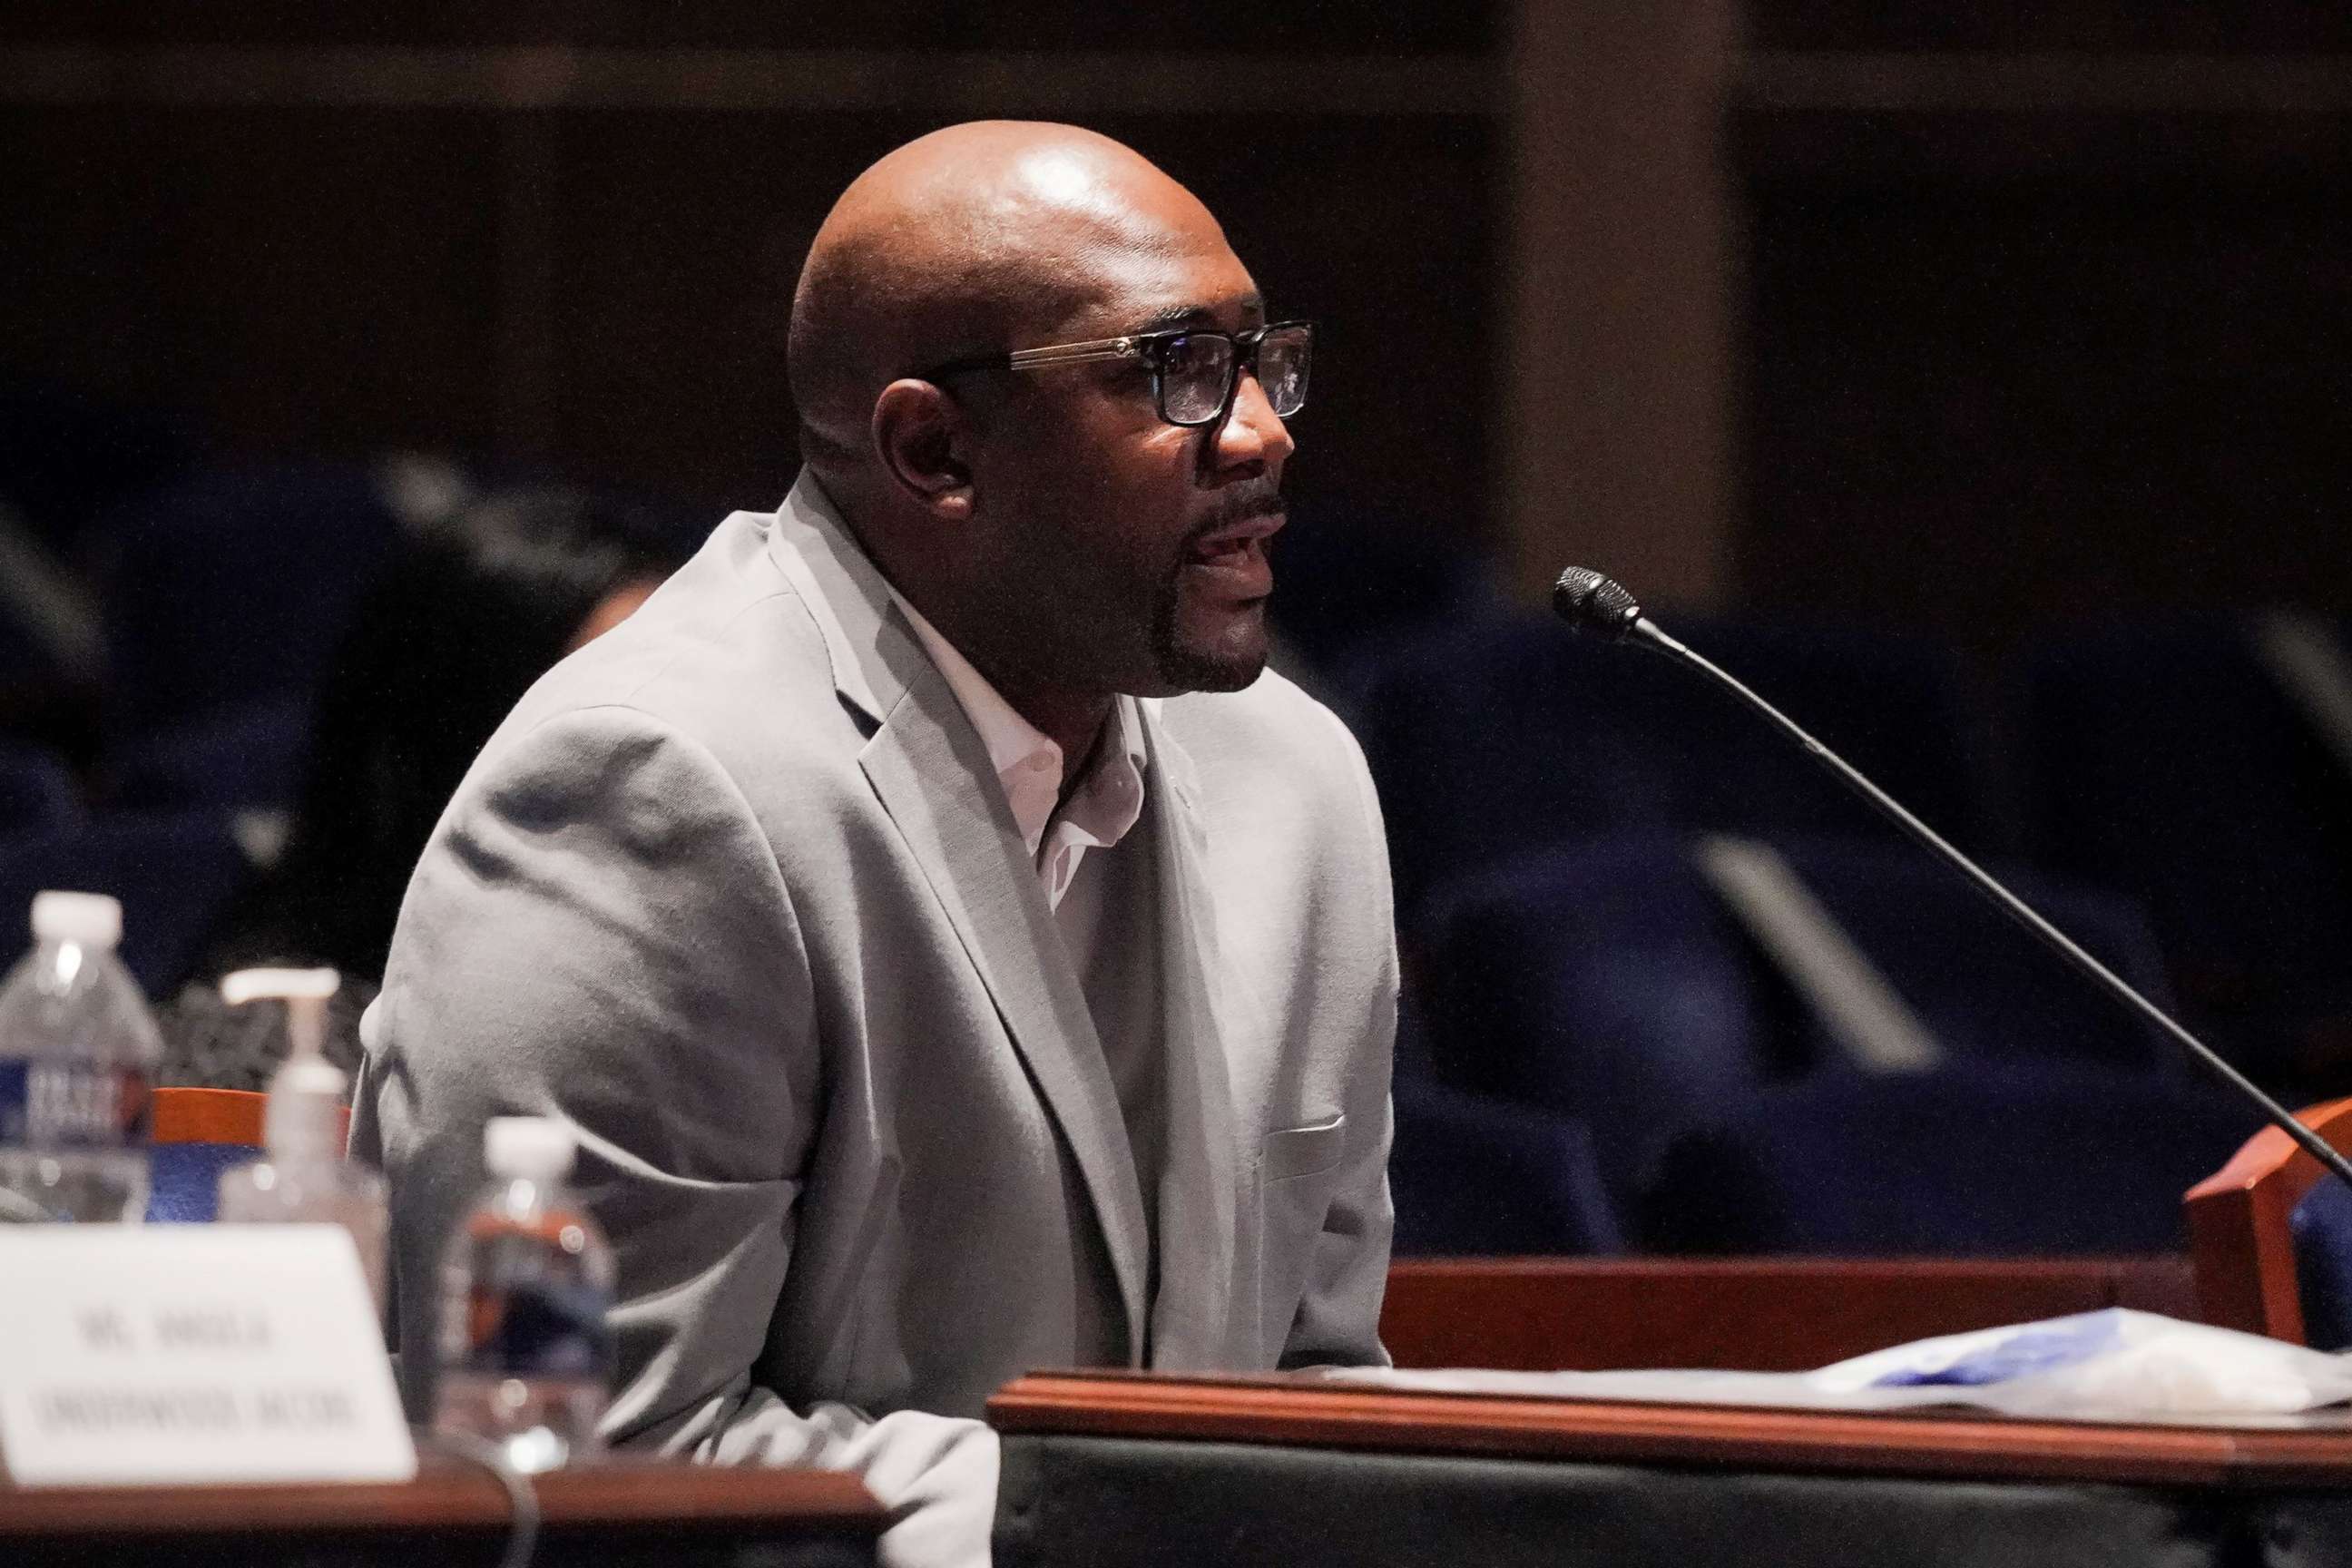 PHOTO: Philonise Floyd, brother of George Floyd, testifies during a House Judiciary Committee hearing to discuss police brutality and racial profiling, in Washington, June 10, 2020.